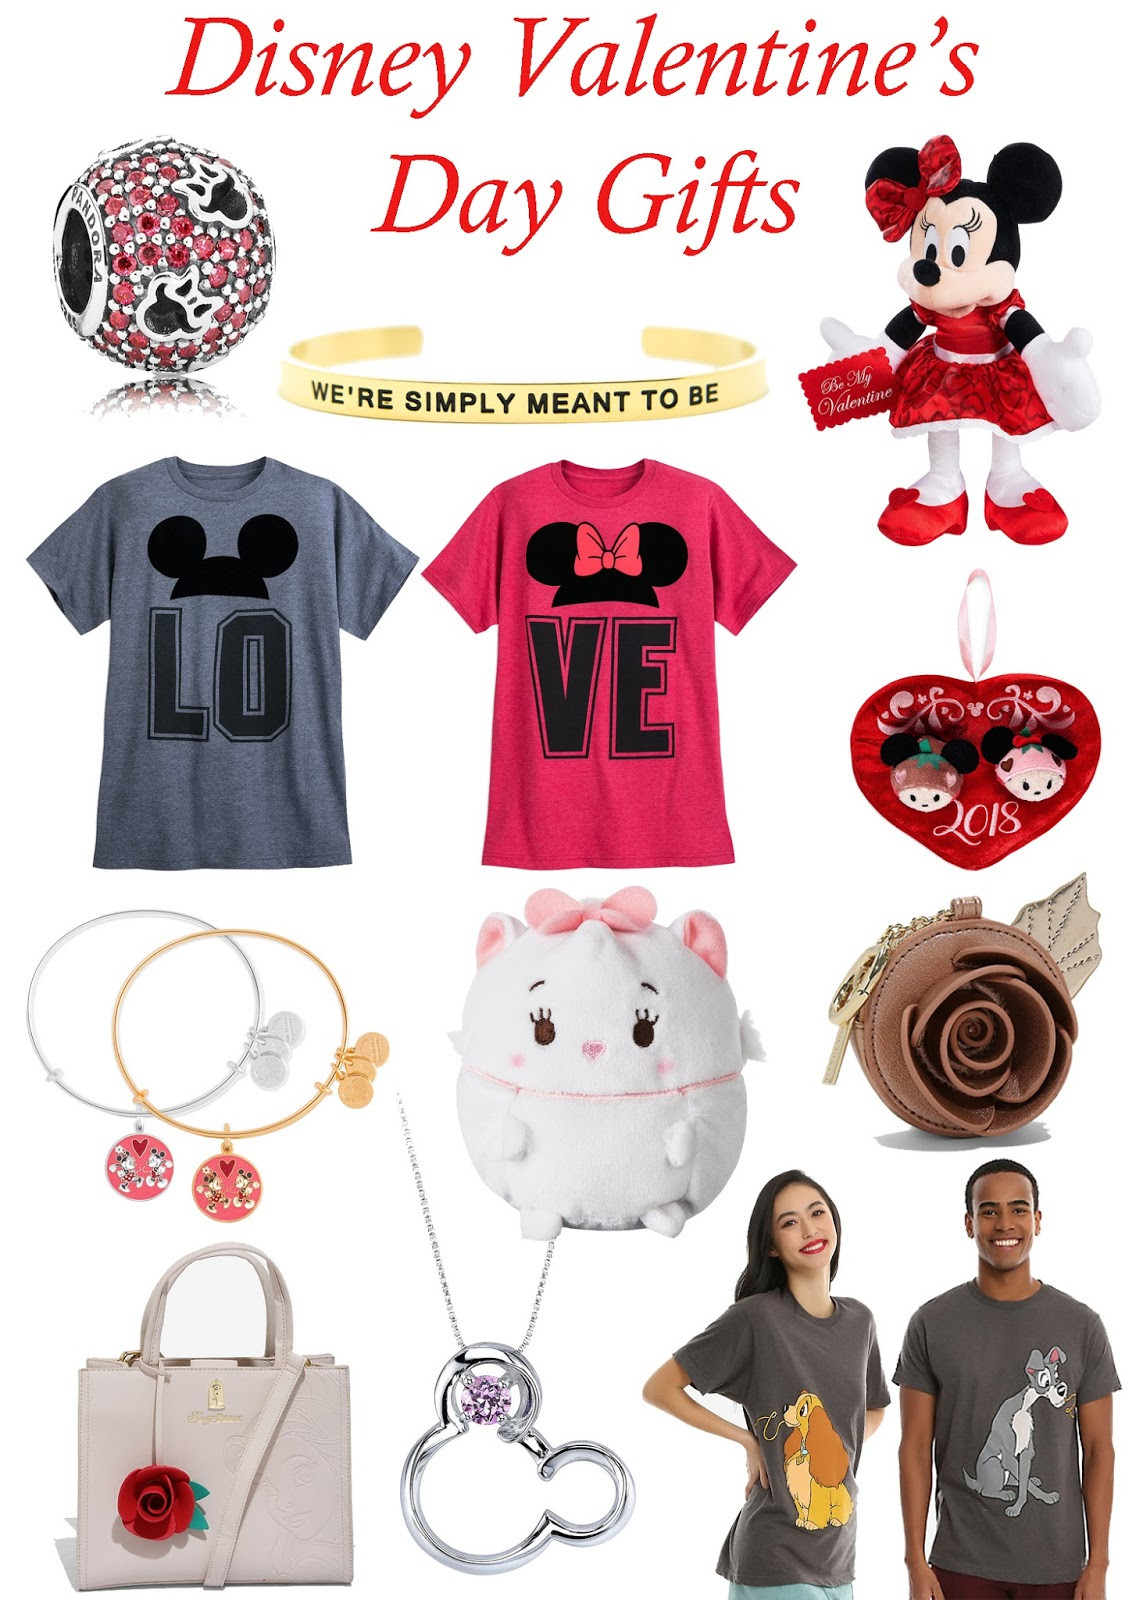 Disney Valentines Day Gifts Awesome Sew Cute Dose Of Disney Disney Valentine S Day Gift Ideas